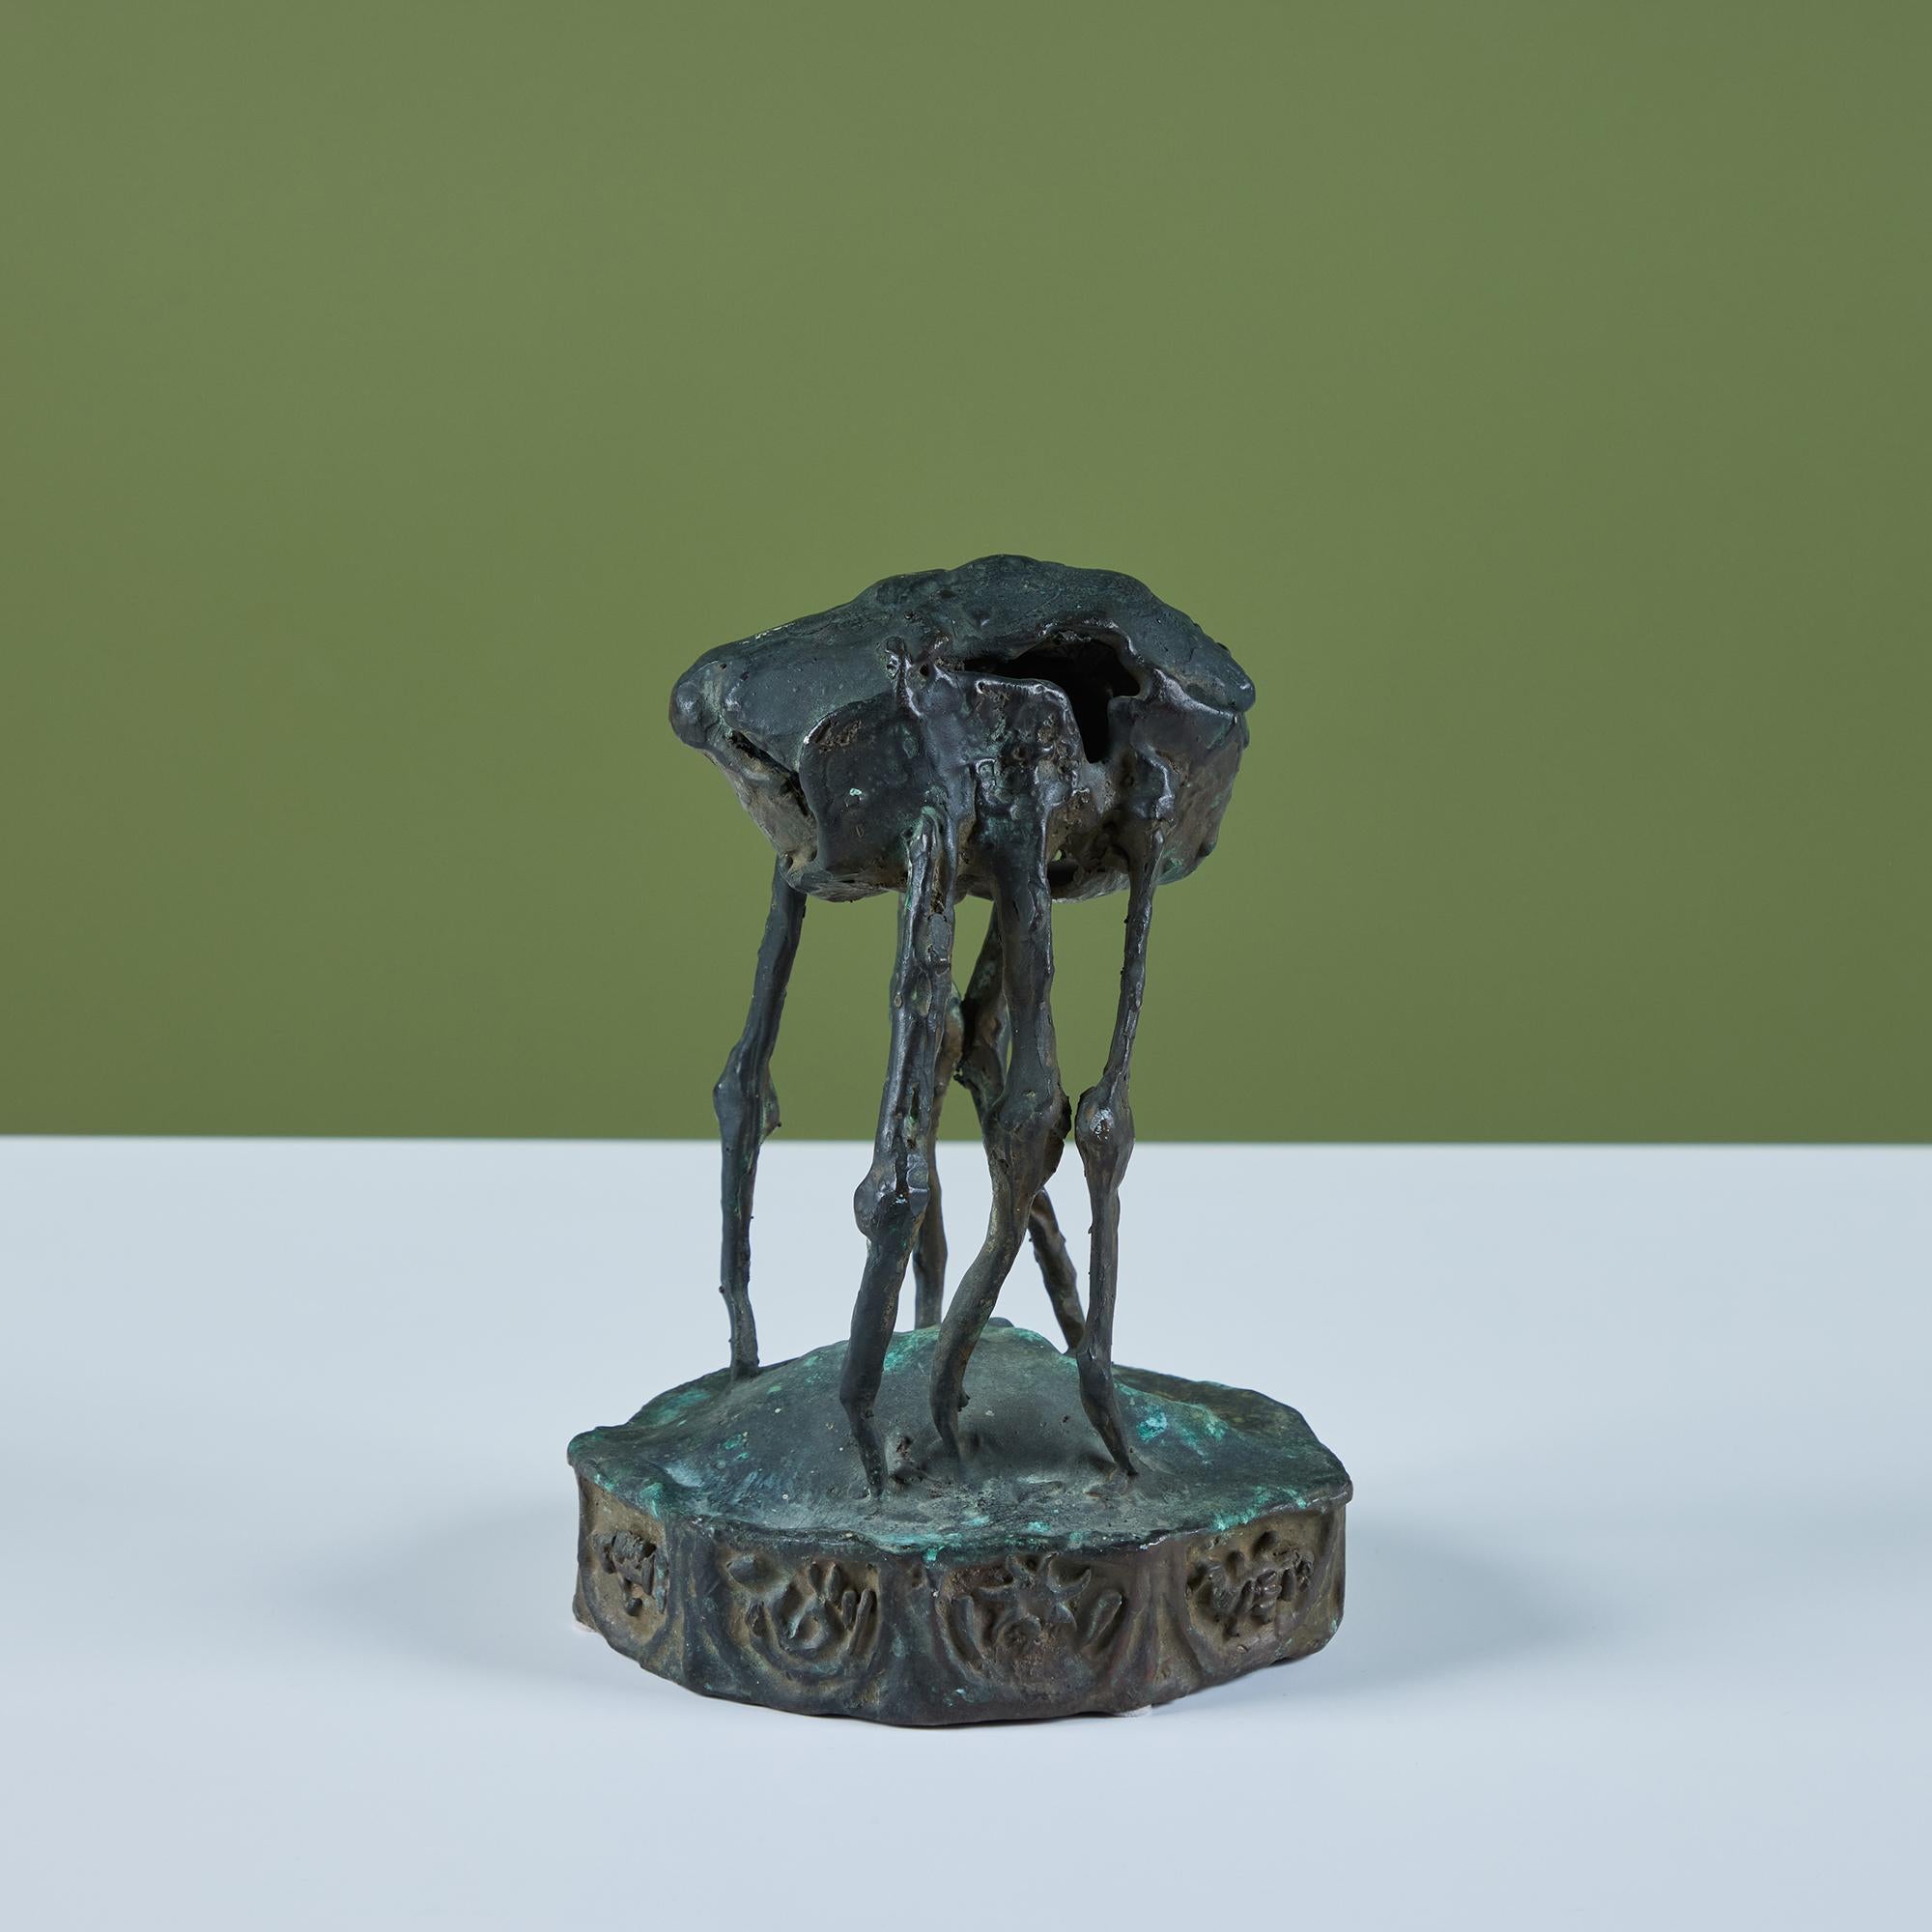 Cast bronze 'Sand Flea' sculpture by American sculptor J. Dale M'Hall. James began sculpting in the 1960's and has worked with a variety of different media throughout his career but bronze sculpting is his preferred medium which expresses and